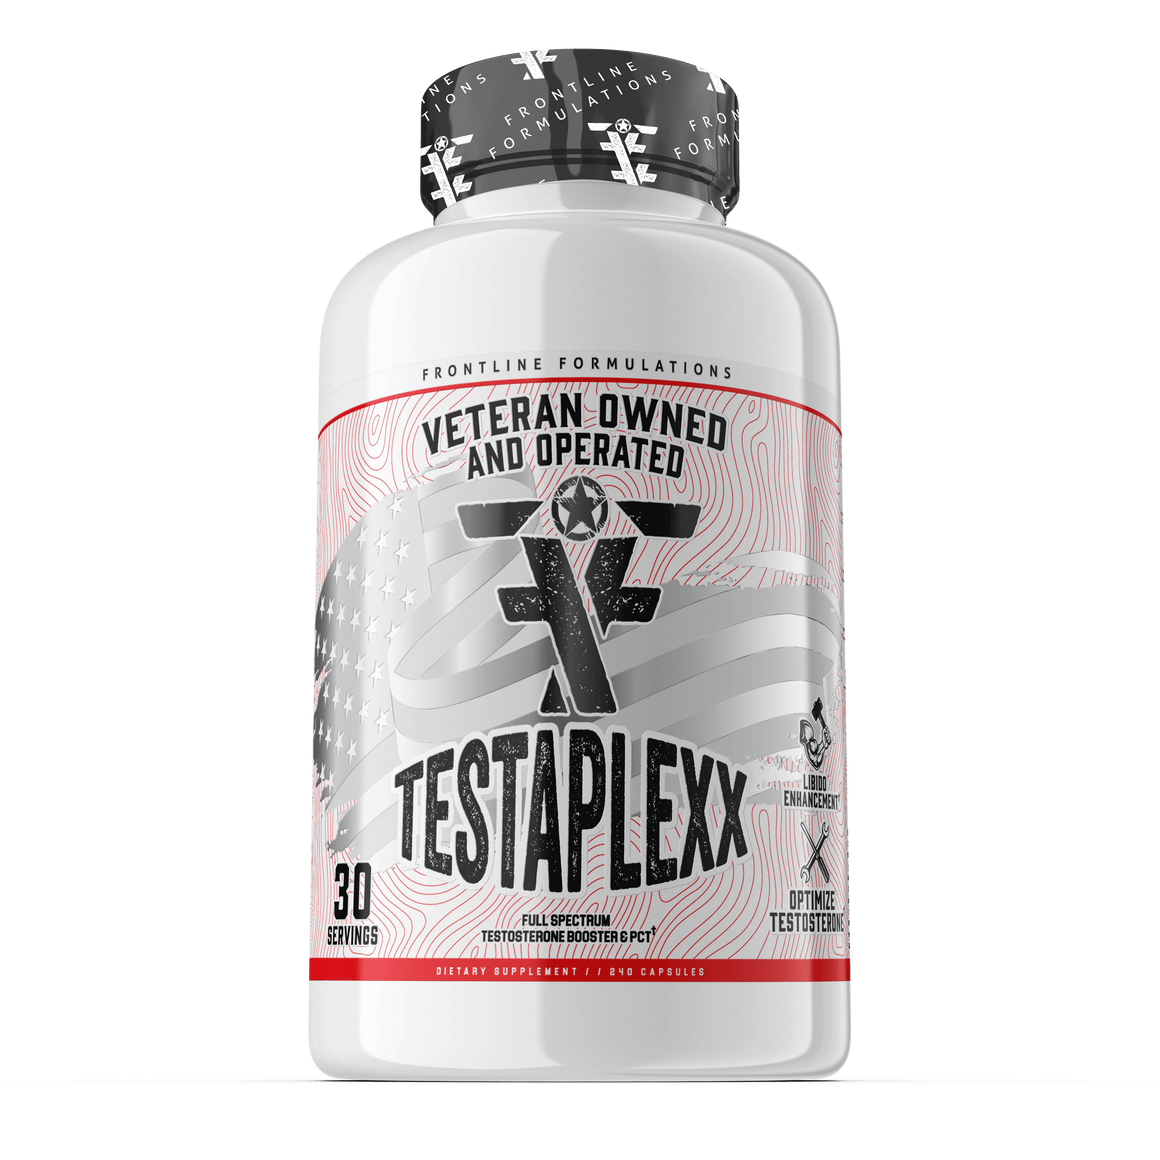 Frontline Formulations Testaplexx (PCT) Look and feel like a man! The king of blends of ingredients for men's health. There isn't an avenue that Testaplexx hasn't covered! Increasing testosterone isn't easy but when prostate, cholesterol, liver, kidney, c